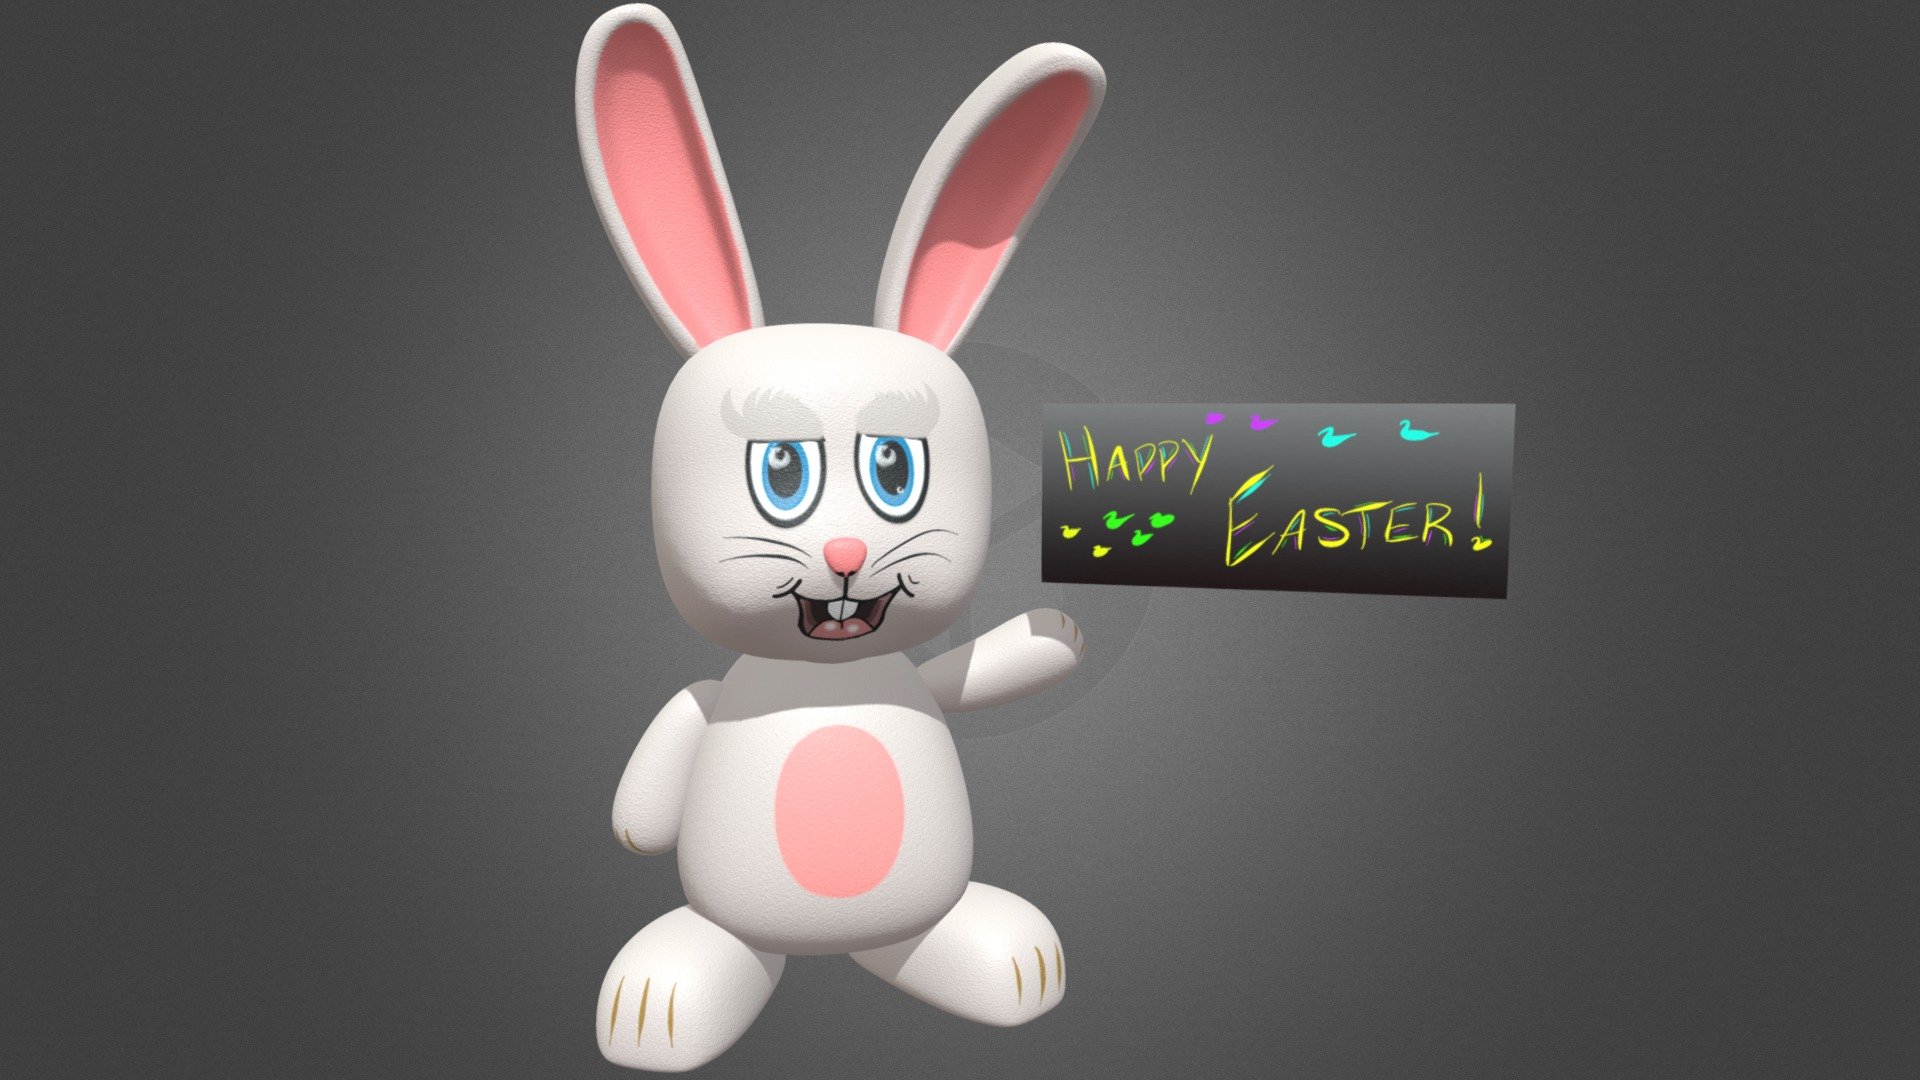 Here is my Easter Bunny submission 3d model